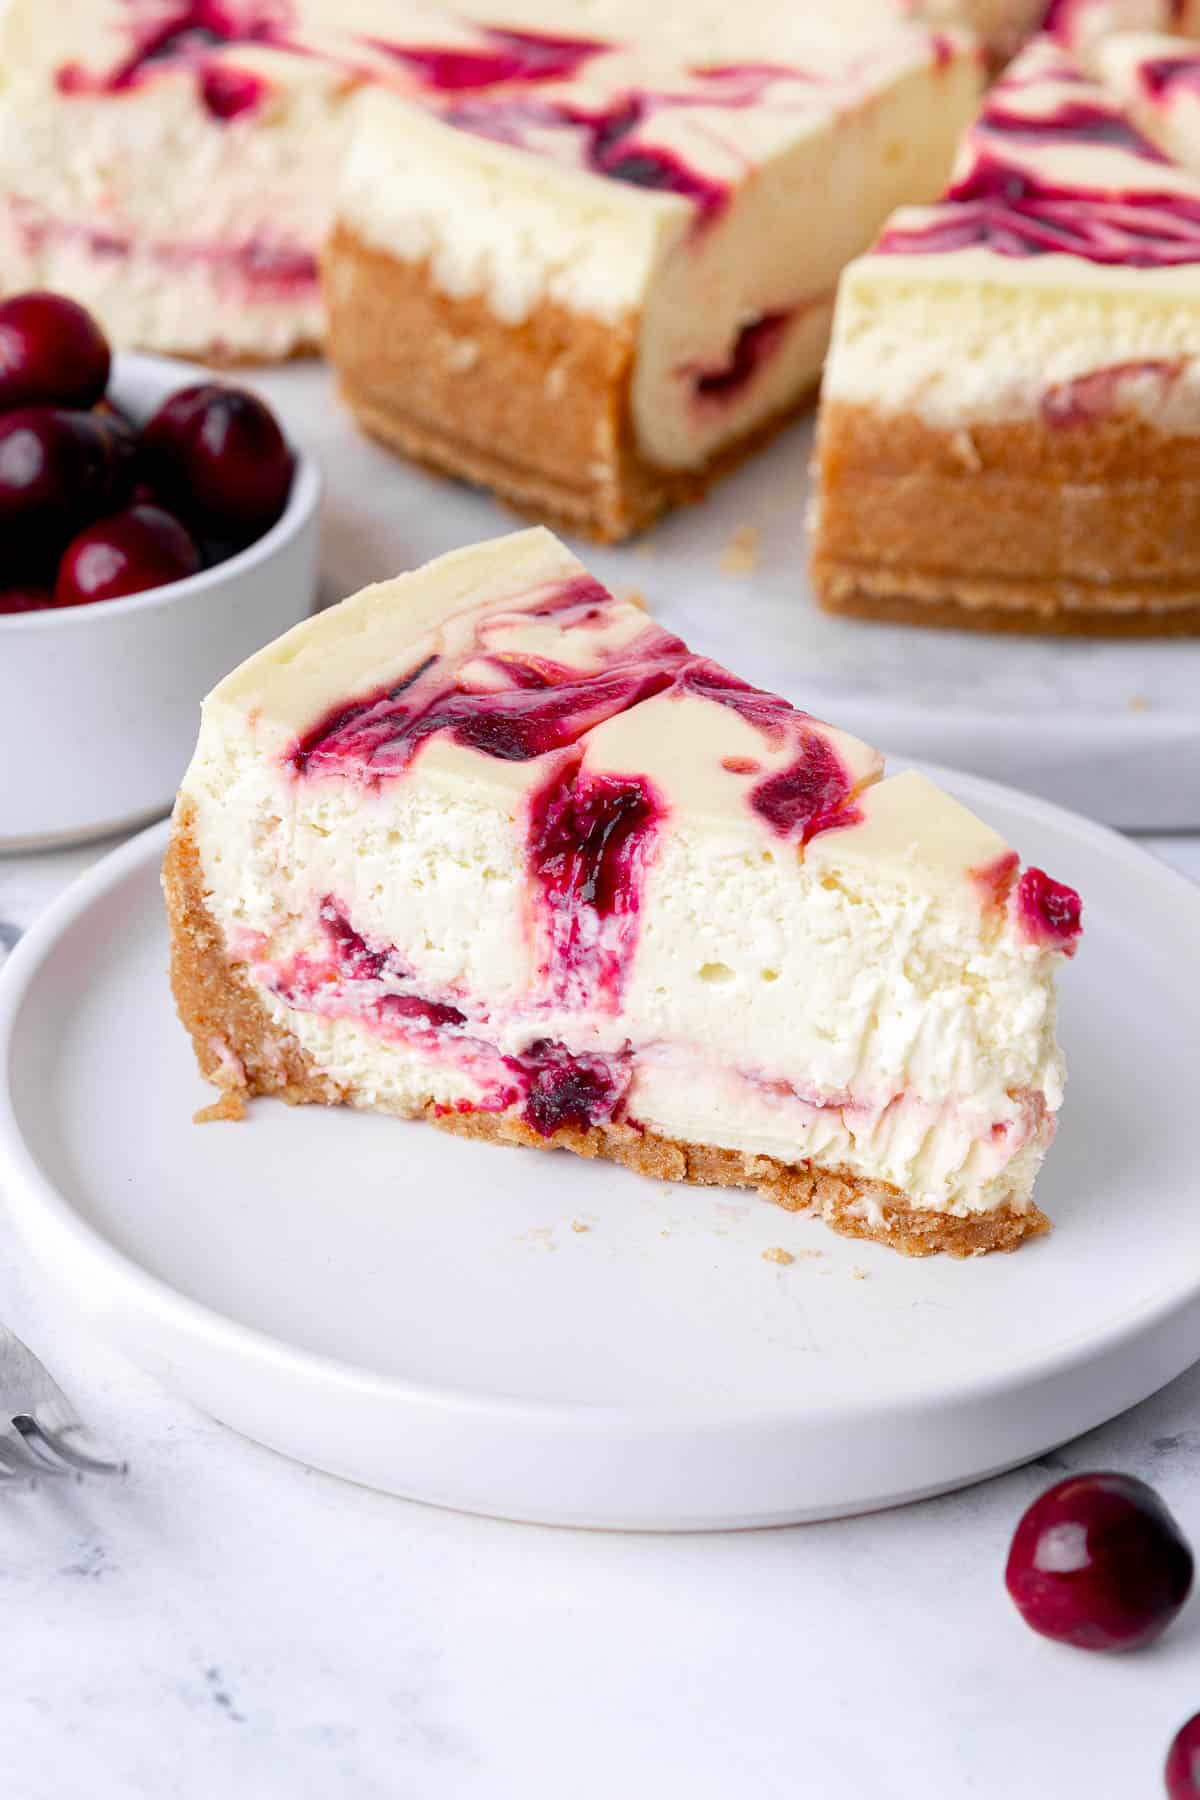 Slice of cranberry swirl cheesecake on a plate to show inside texture and layers of cranberry throughout.